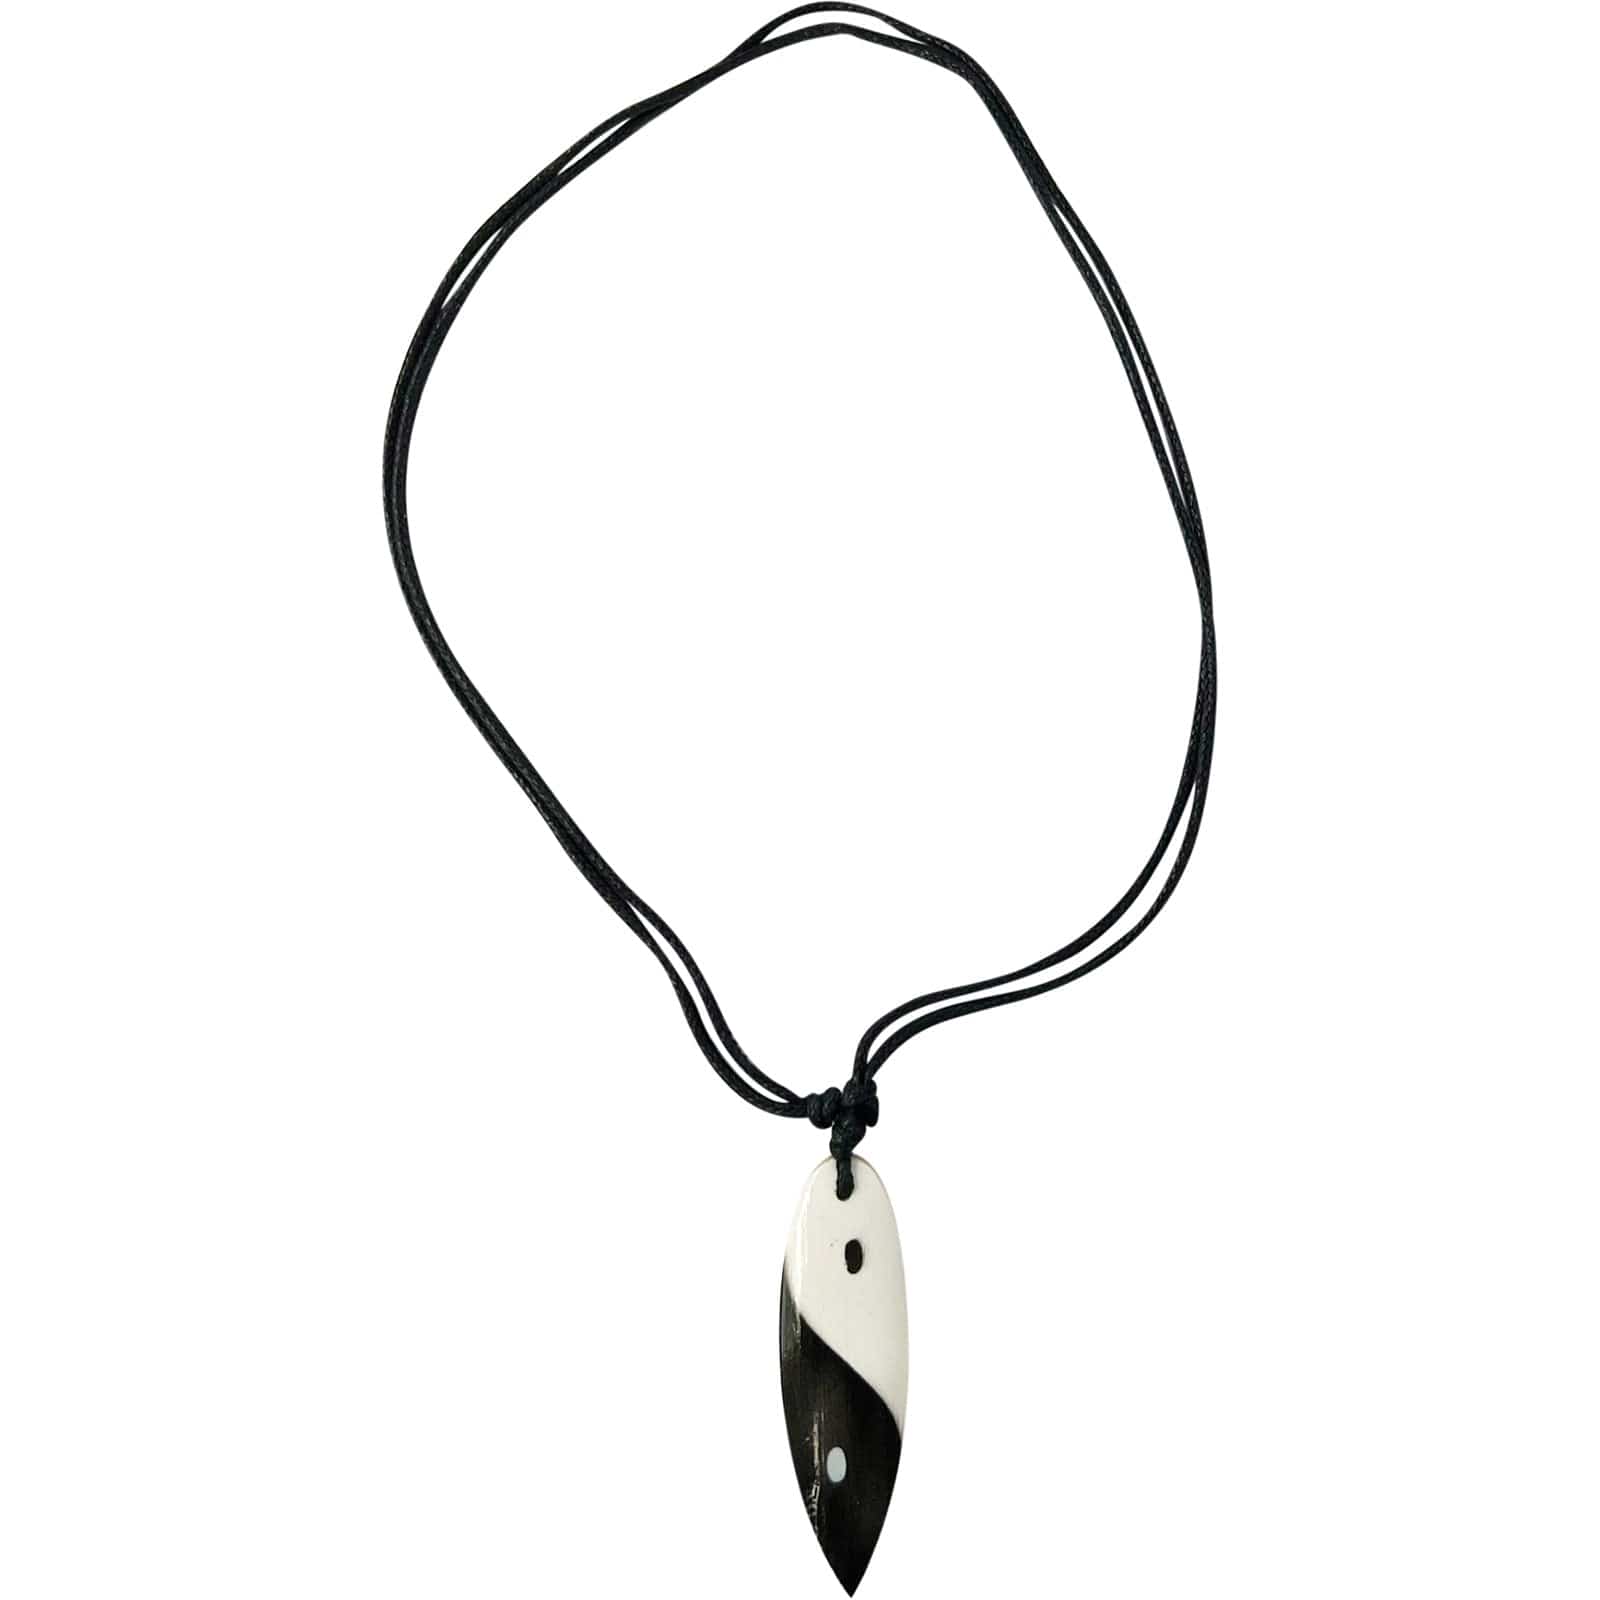 Yin and Yang Surfboard Pendant Necklace Black Cord Chain Mens Womens Jewellery